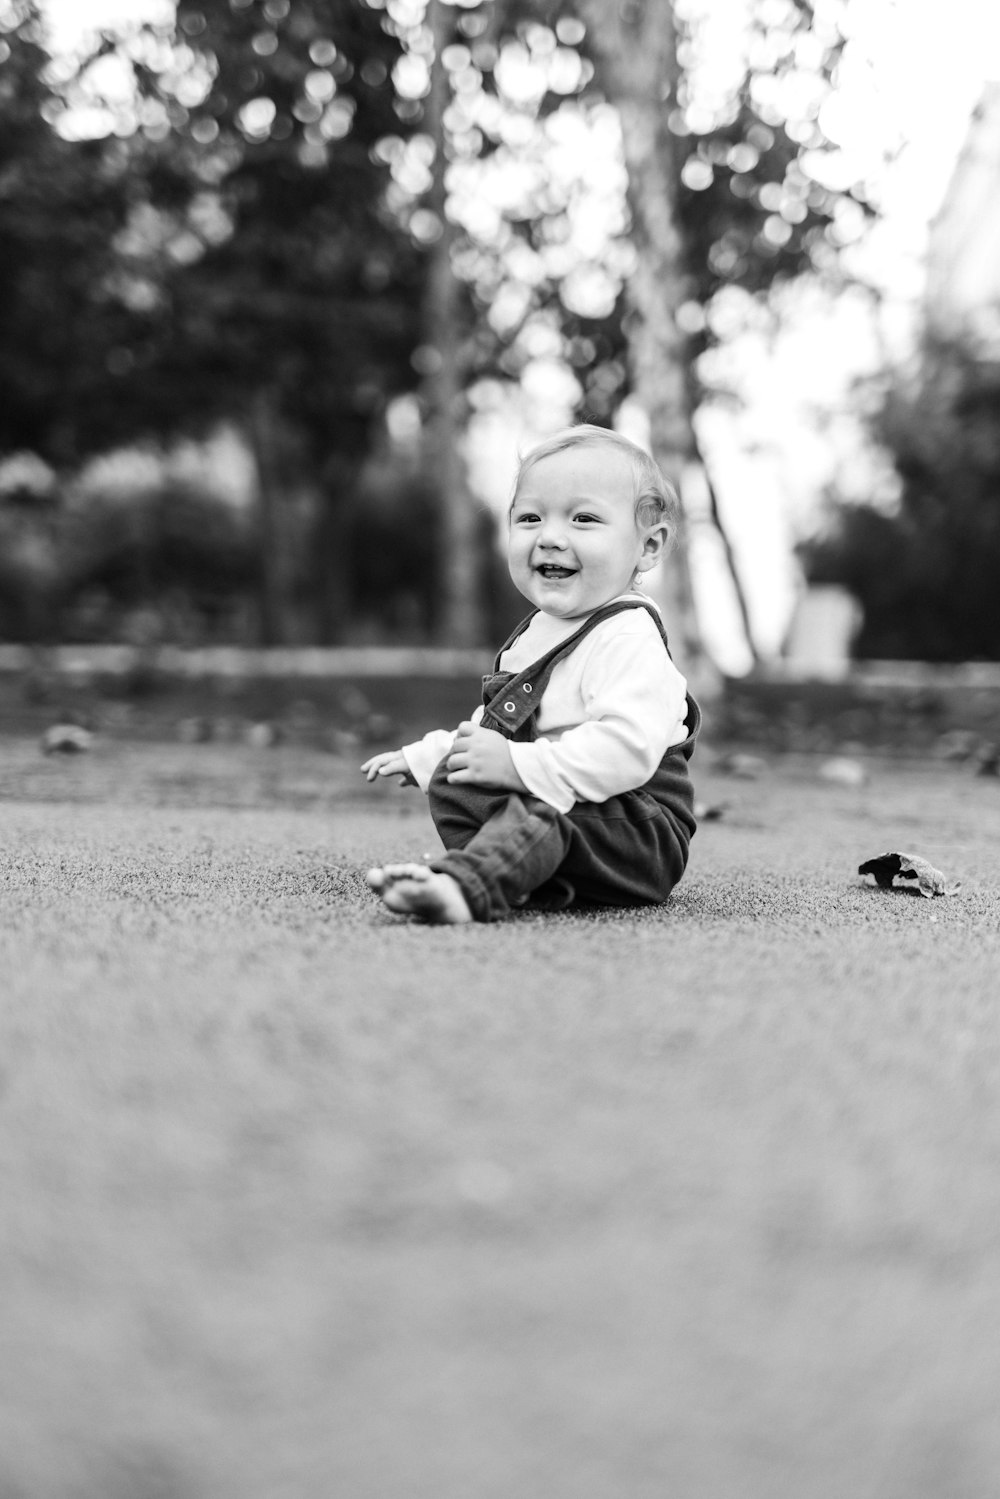 grayscale photo of child sitting on ground